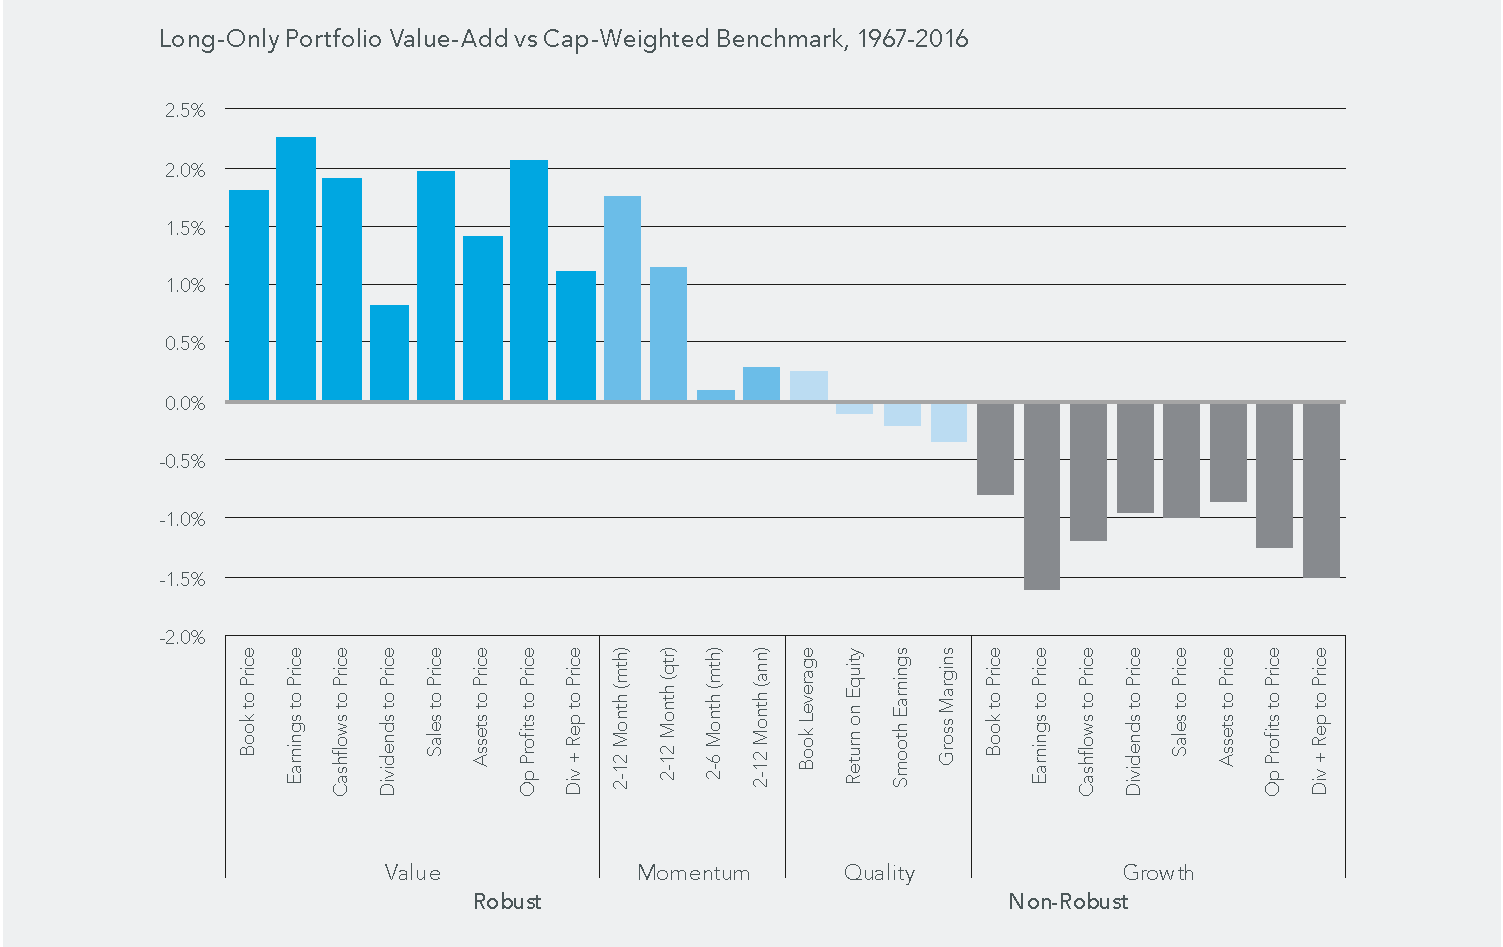 Long-Only Portfolio Value-Add vs Cap-Weighted Benchmark